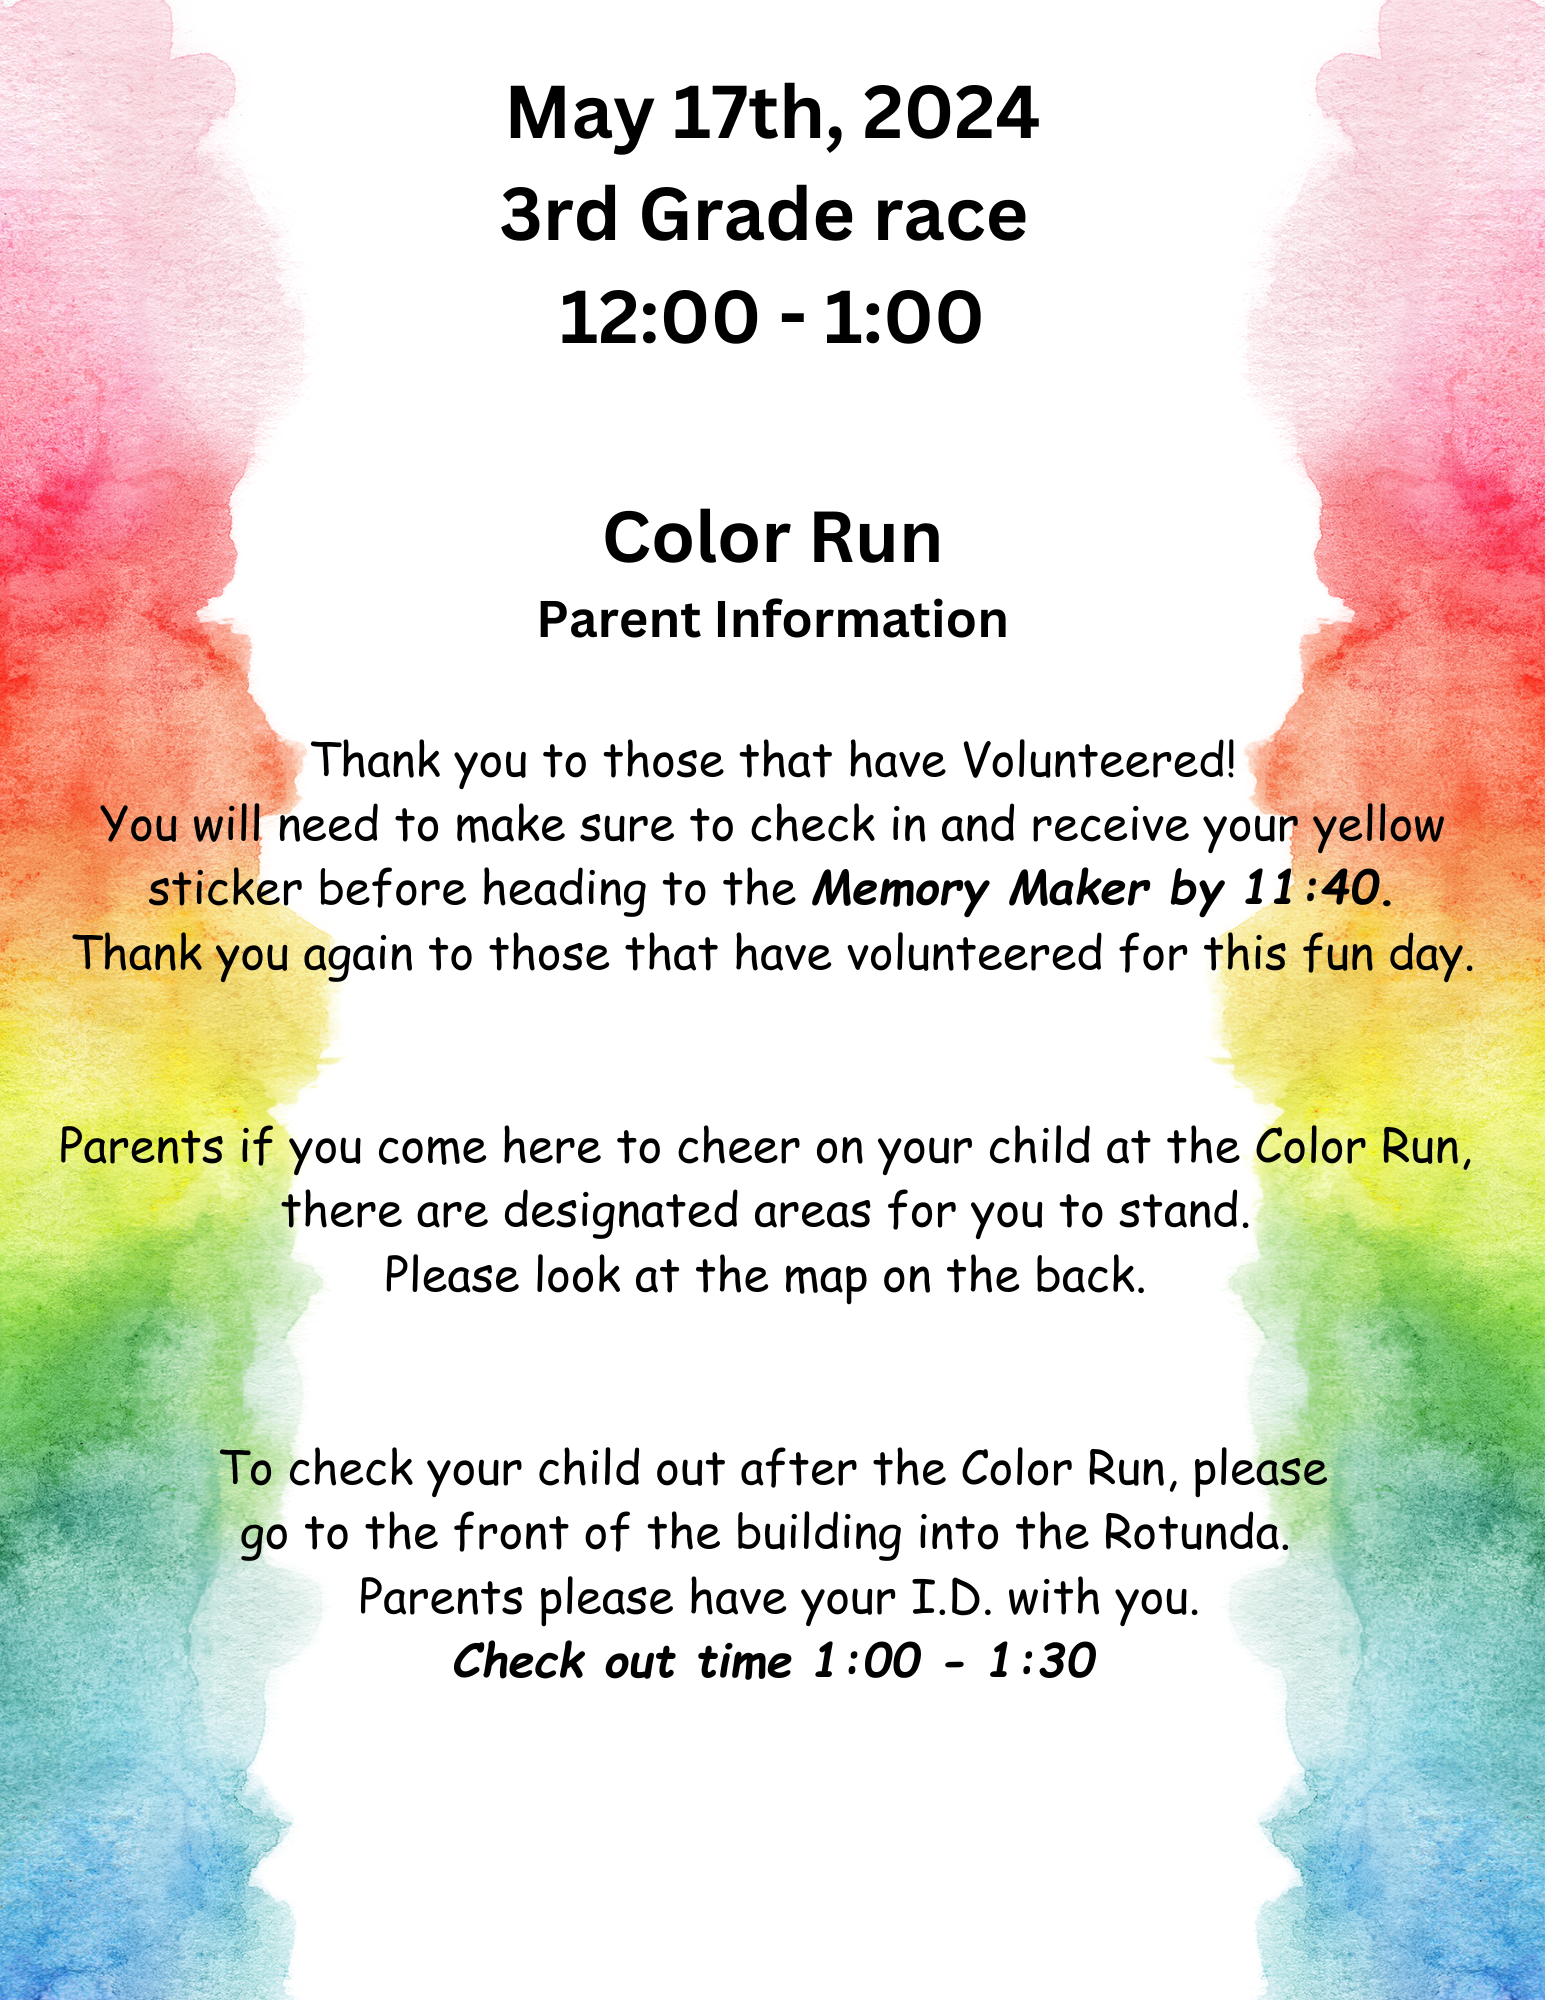 May 17th, 2024 3rd Grade race  12:00 - 1:00  Thank you to those that have Volunteered! You will need to make sure to check in and receive your yellow sticker before heading to the Memory Maker by 11:40. Thank you again to those that have volunteered for this fun day.   Parents if you come here to cheer on your child at the Color Run,  there are designated areas for you to stand.  Please look at the map on the back.    To check your child out after the Color Run, please go to the front of the building into the Rotunda.   Parents please have your I.D. with you. Check out time 1:00 - 1:30